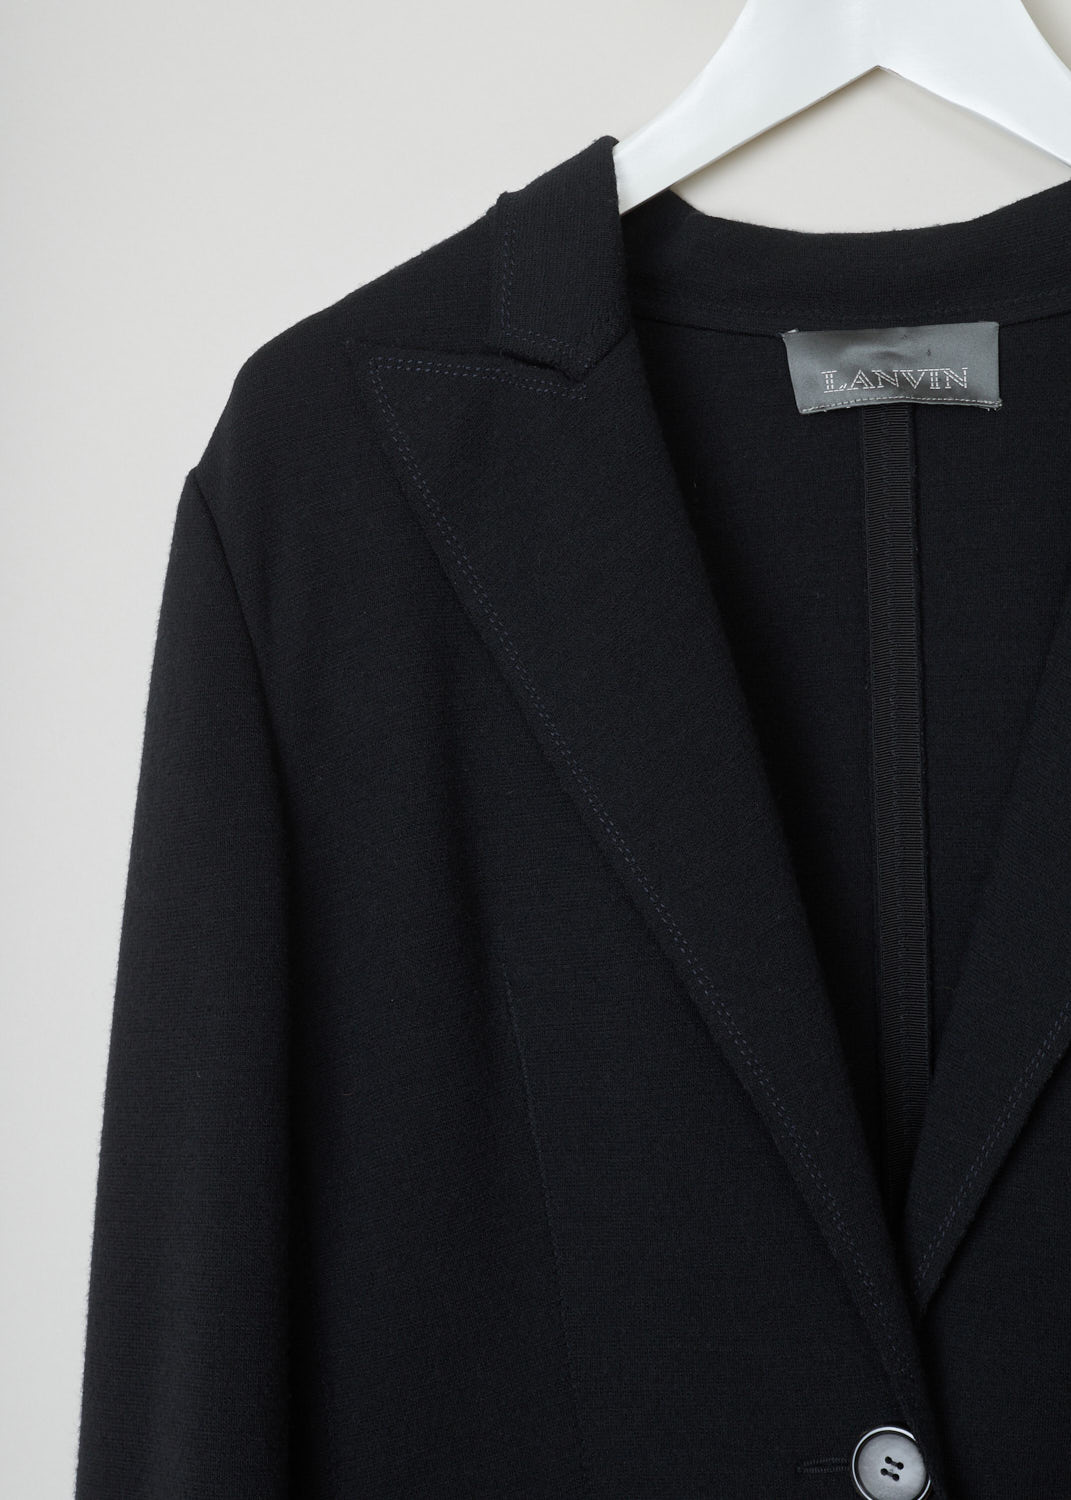 Lanvin, black peak lapel jacket, W07280034P0B_noir_10, black, detail, black long sleeve blazer, designed with peak lapels and four buttons on the cuffs. The pockets on this model similar to slip in pockets but with a zipper. 